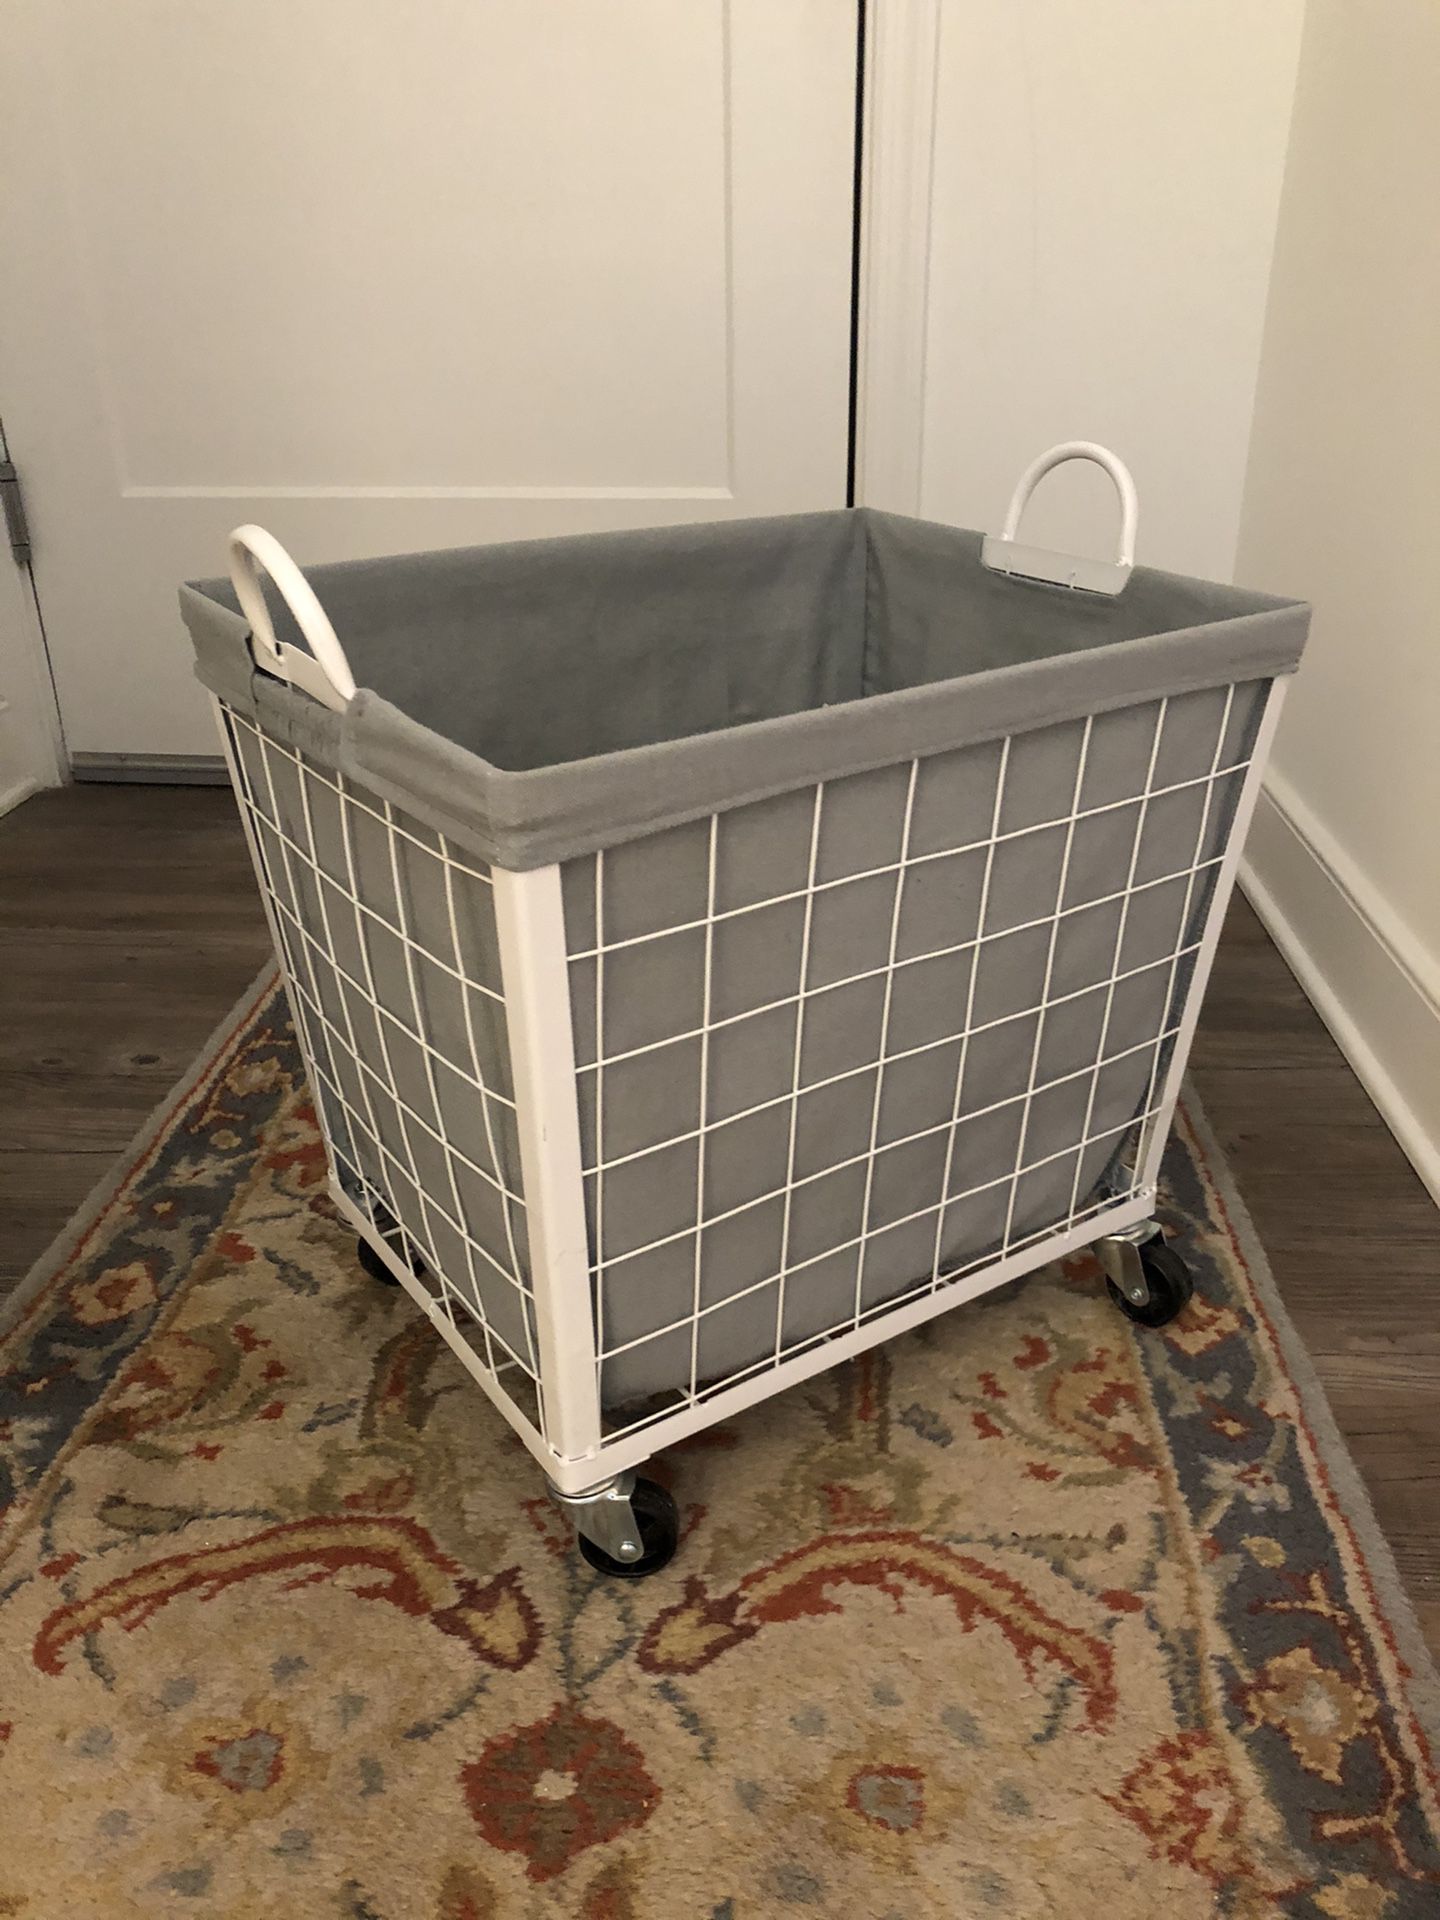 Rolly laundry basket